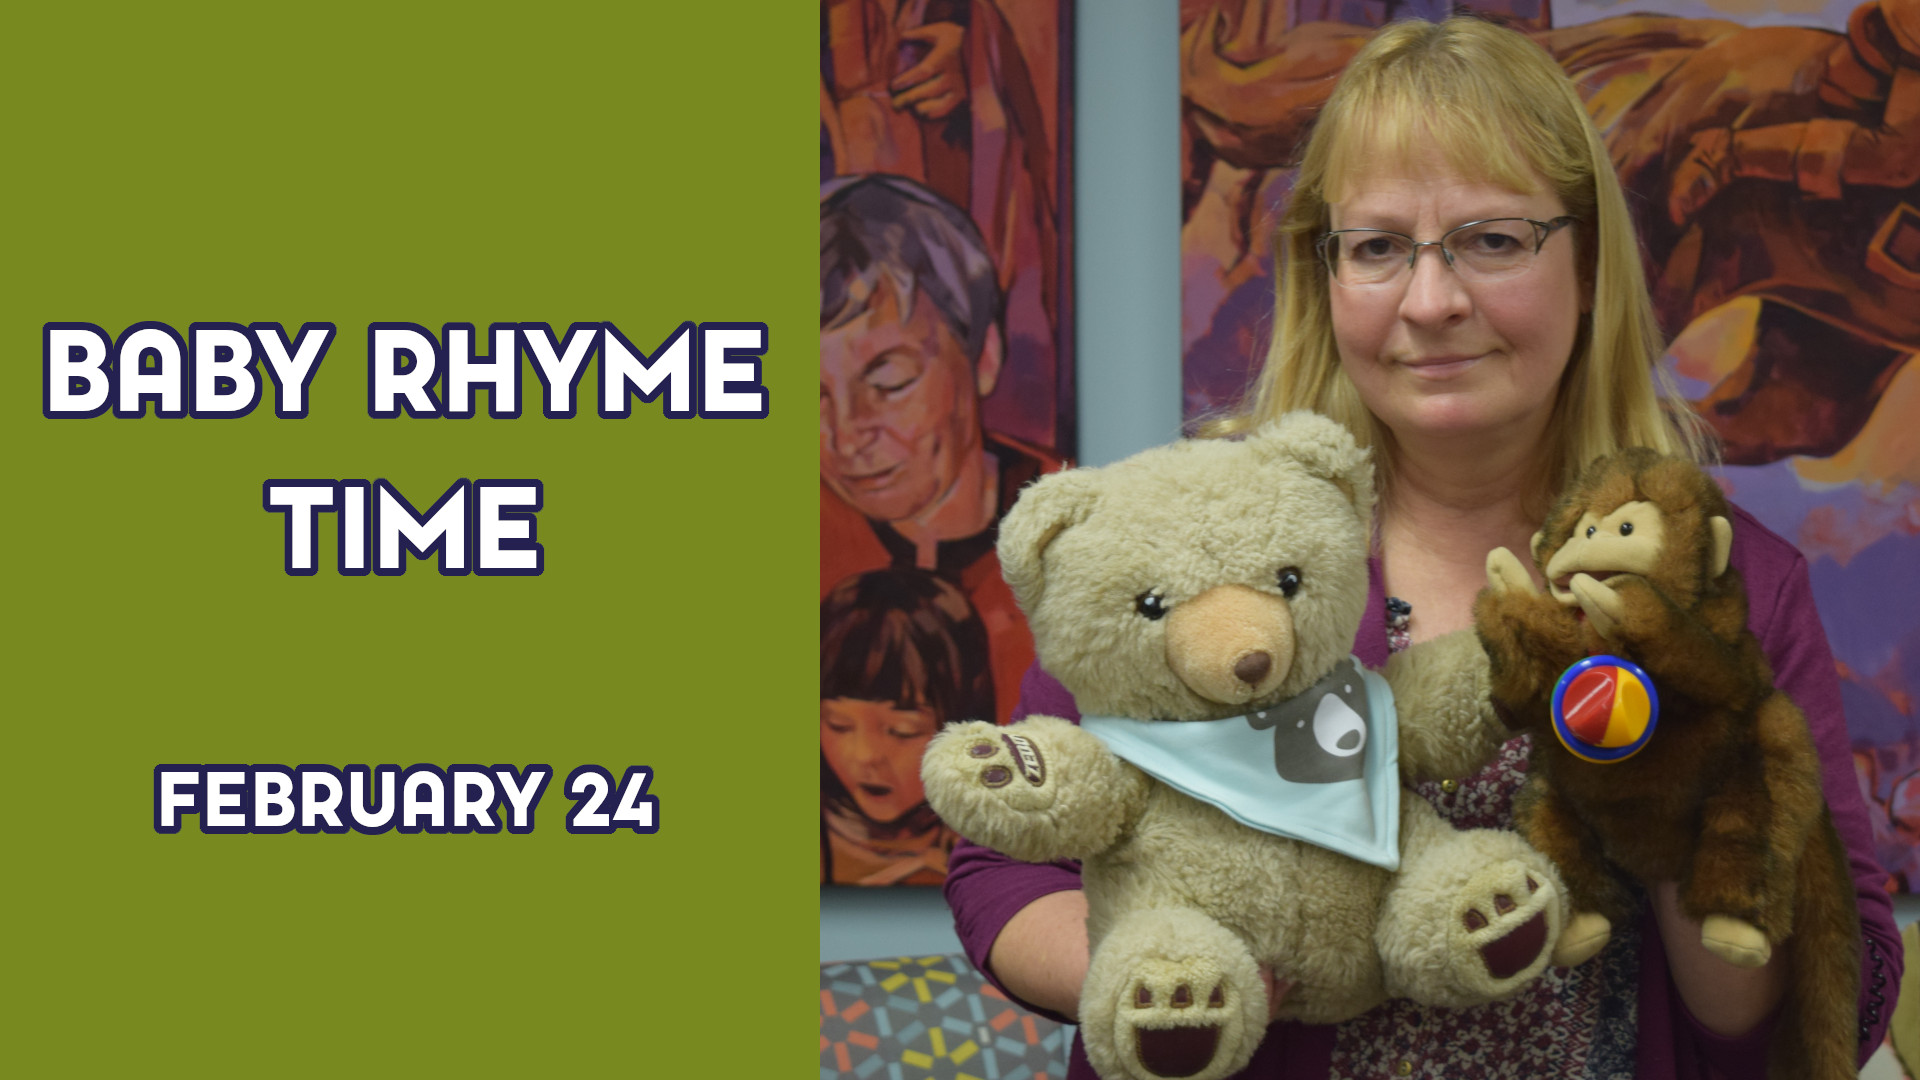 A woman holds stuffed animals next to the text "Baby Rhyme Time February 24"